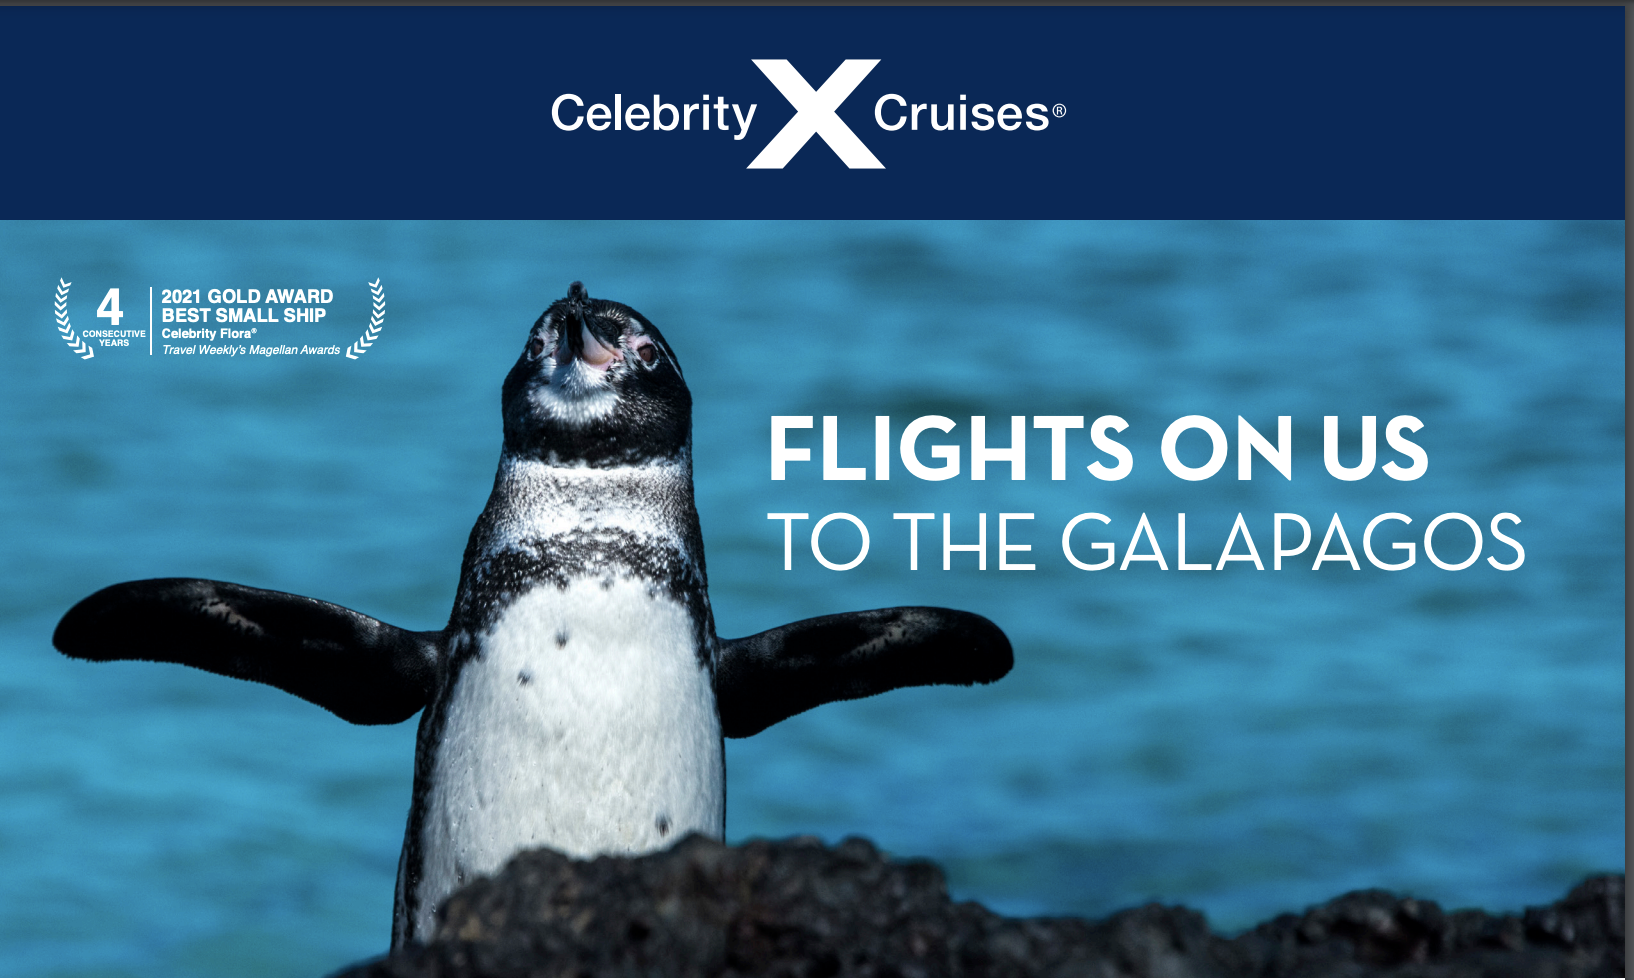 Flights on us to the Galapagos